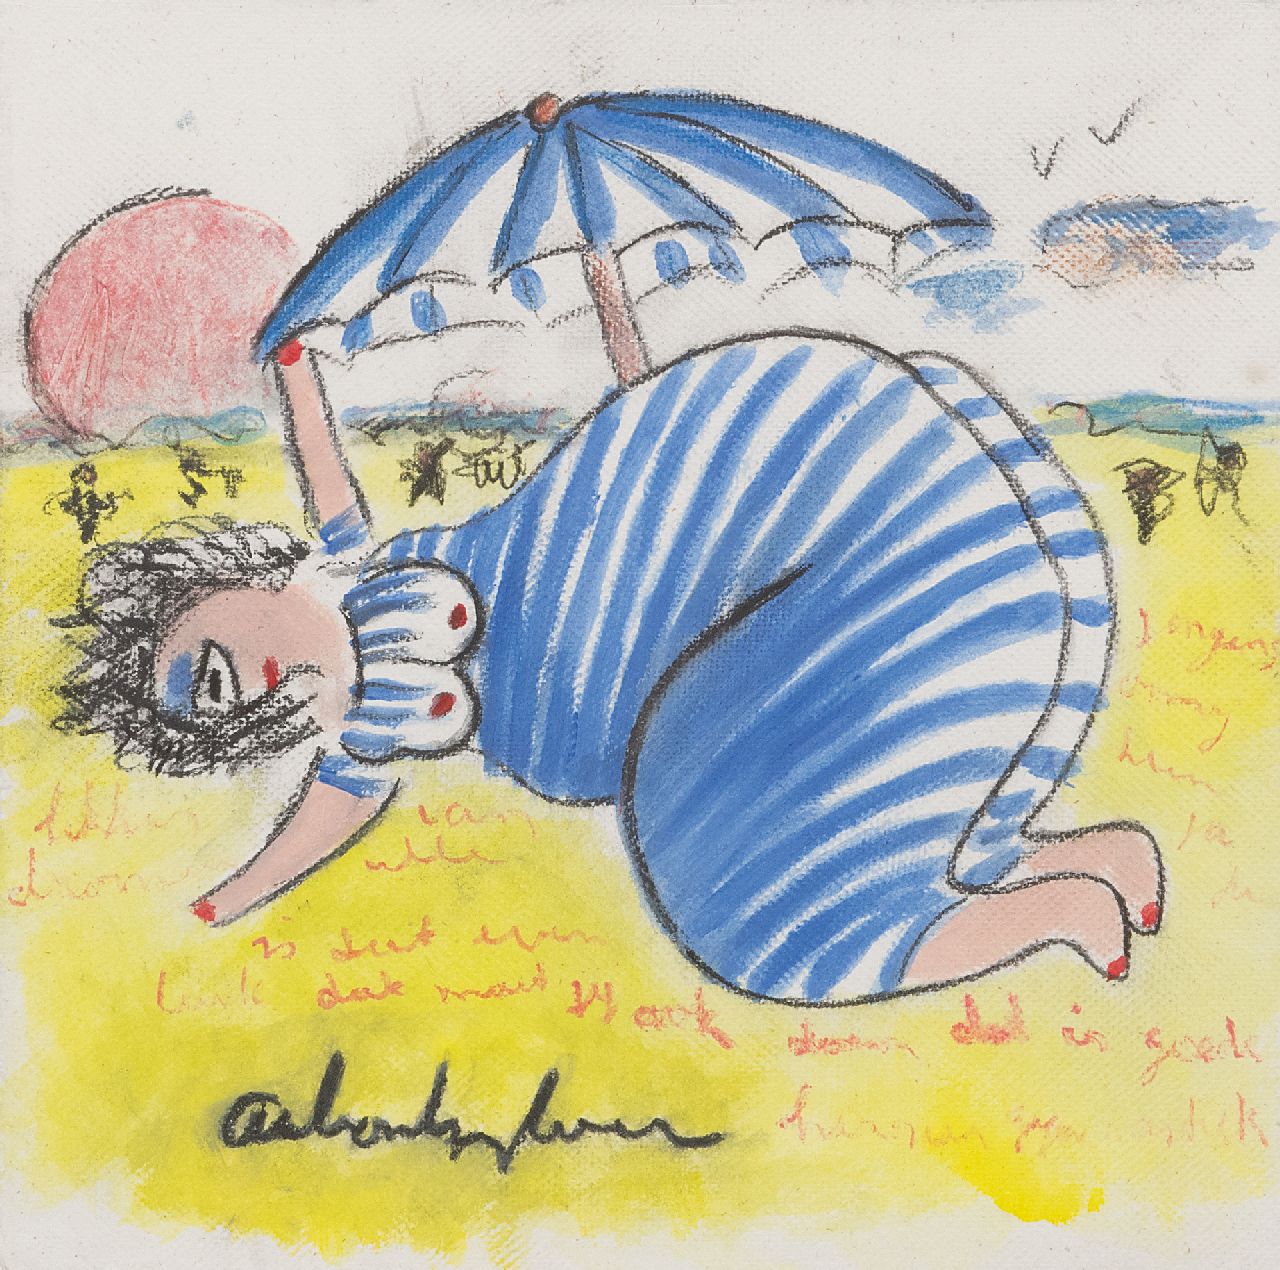 Heyboer A.  | Anton Heyboer | Watercolours and drawings offered for sale | Sunbathing under an umbrella, chalk and gouache on paper 28.0 x 28.0 cm, signed l.c.